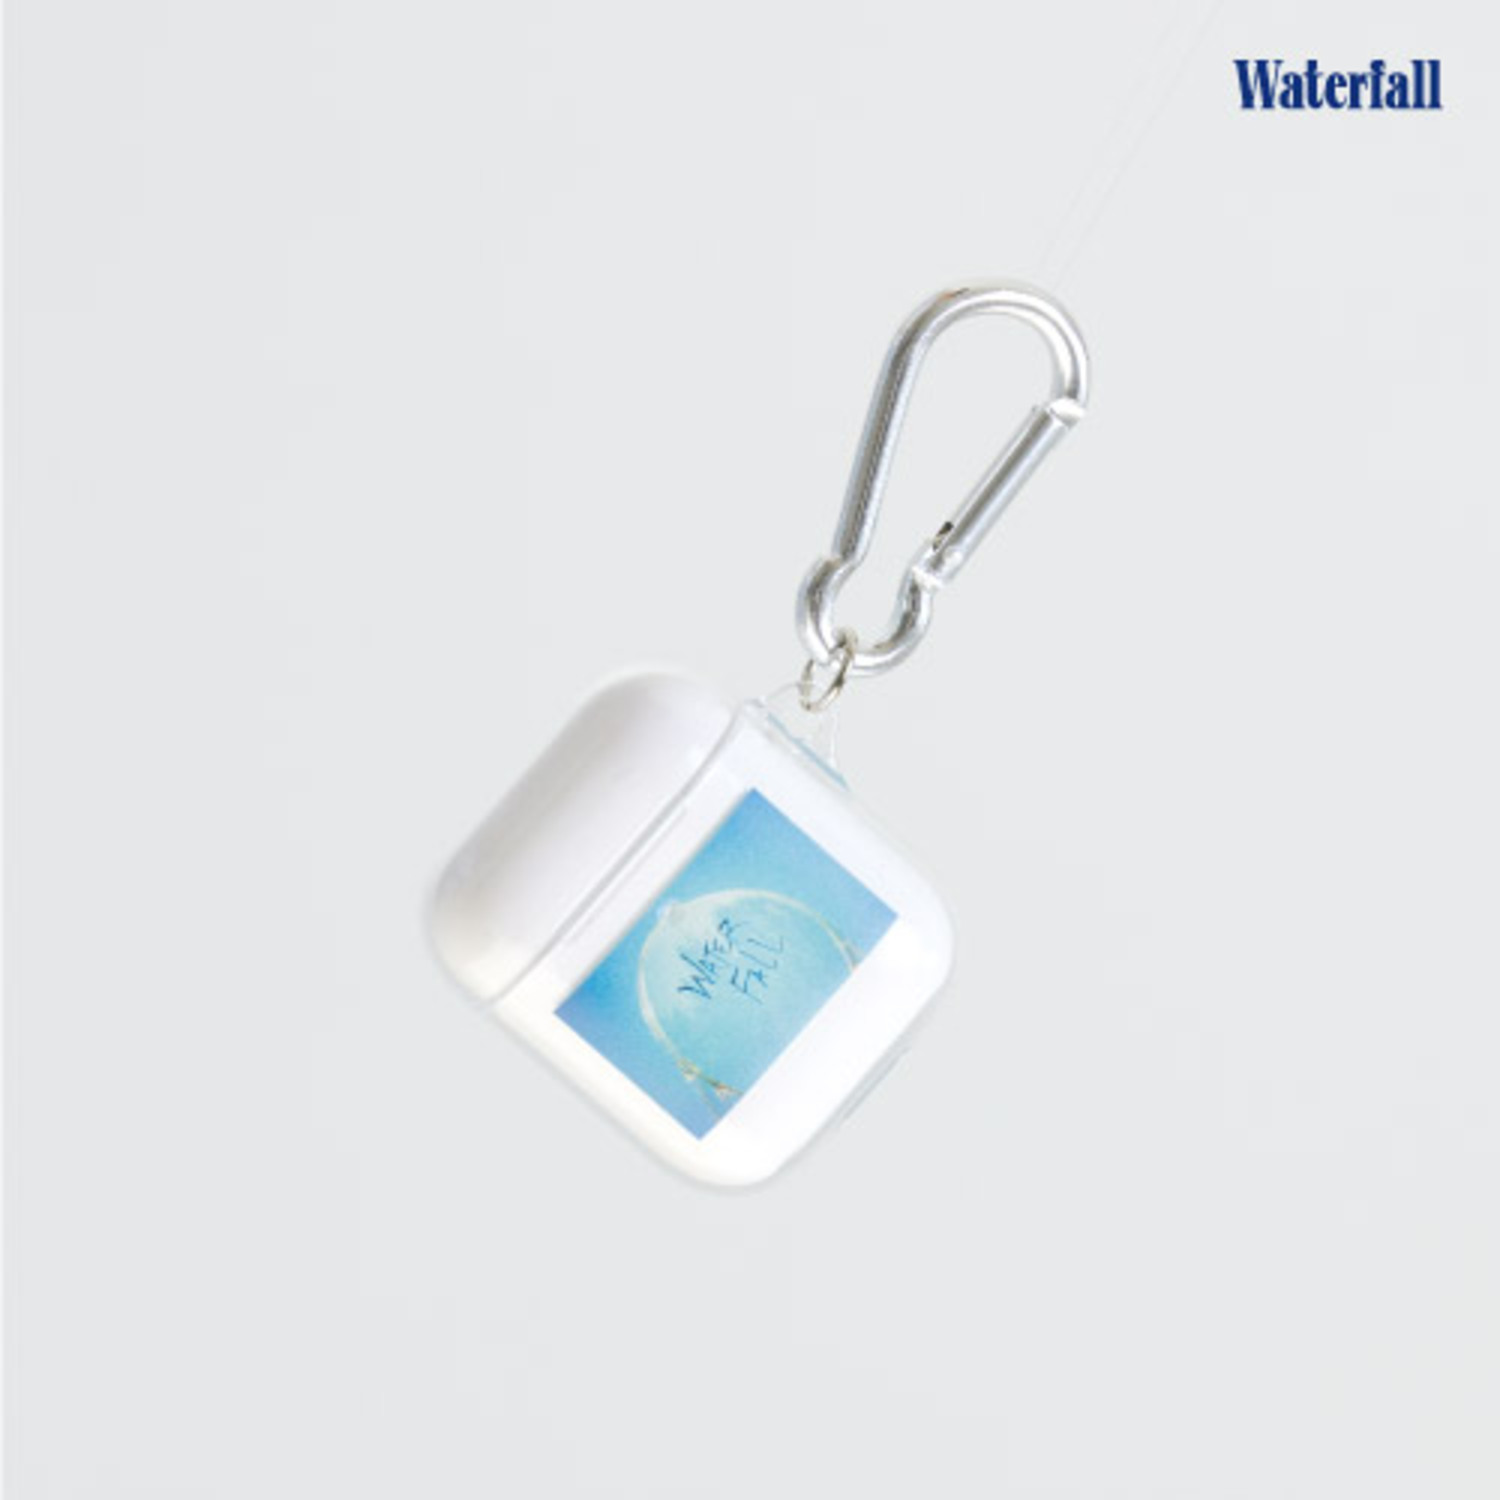 B.I [Waterfall] OFFICIAL MD - 에어팟 케이스 AirPods Case